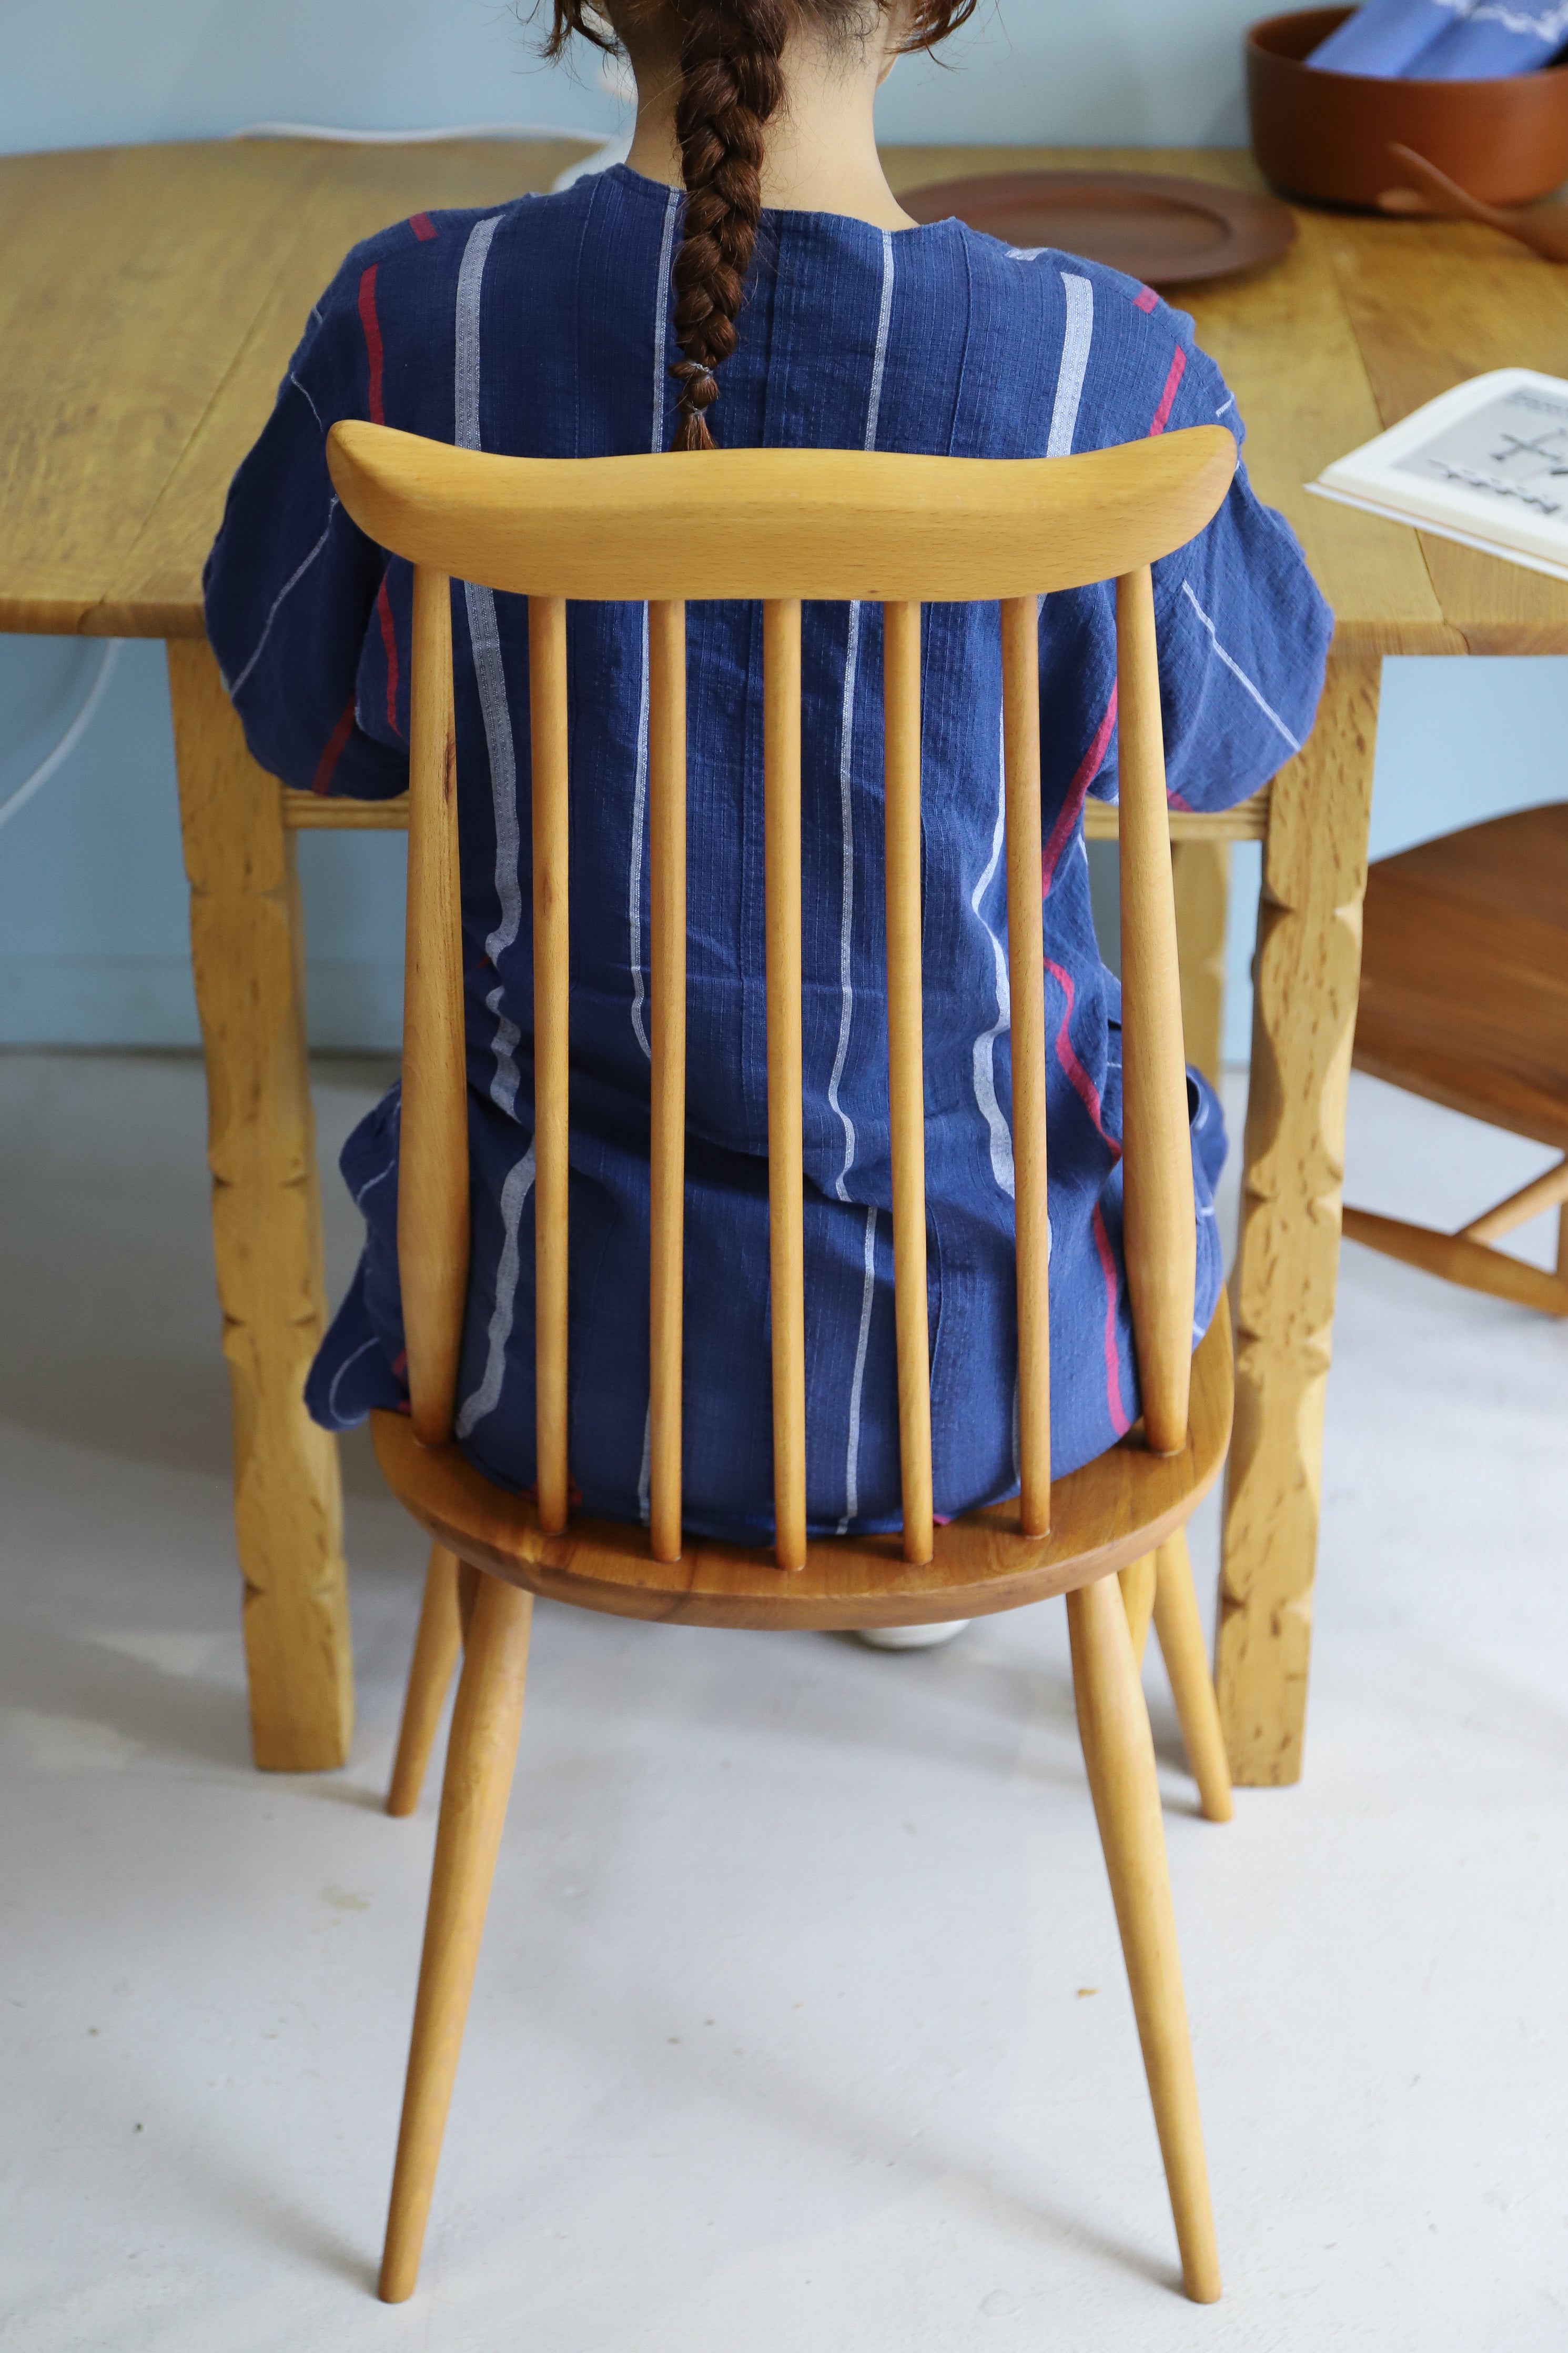 UK Vintage Ercol Chair/イギリスヴィンテージ アーコール ダイニングチェア 椅子